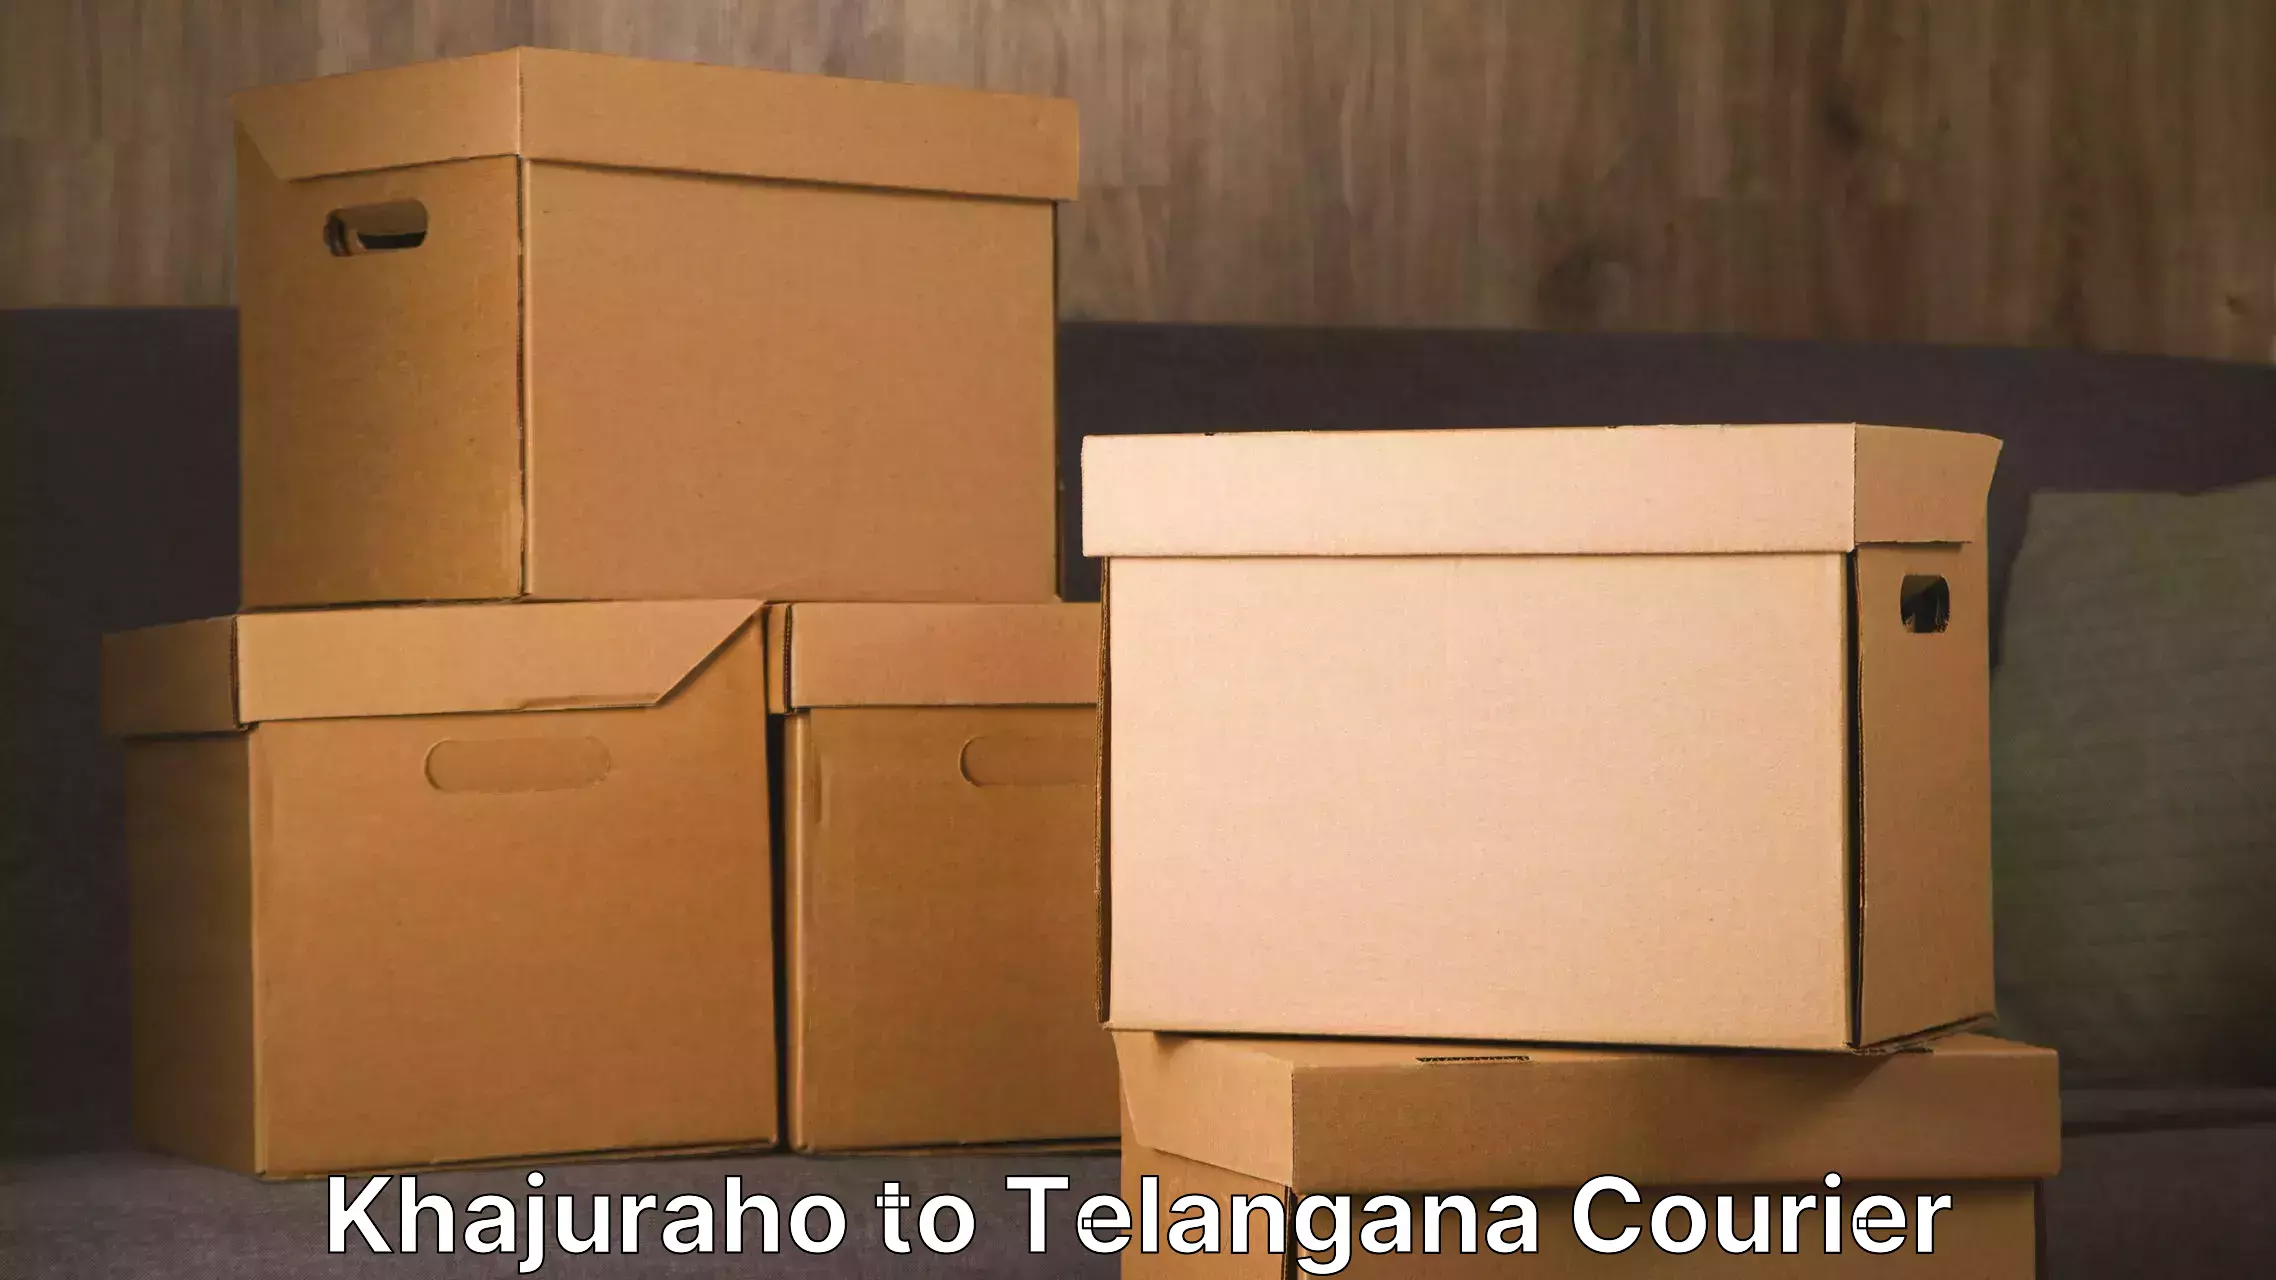 Quality relocation assistance in Khajuraho to Sultanabad